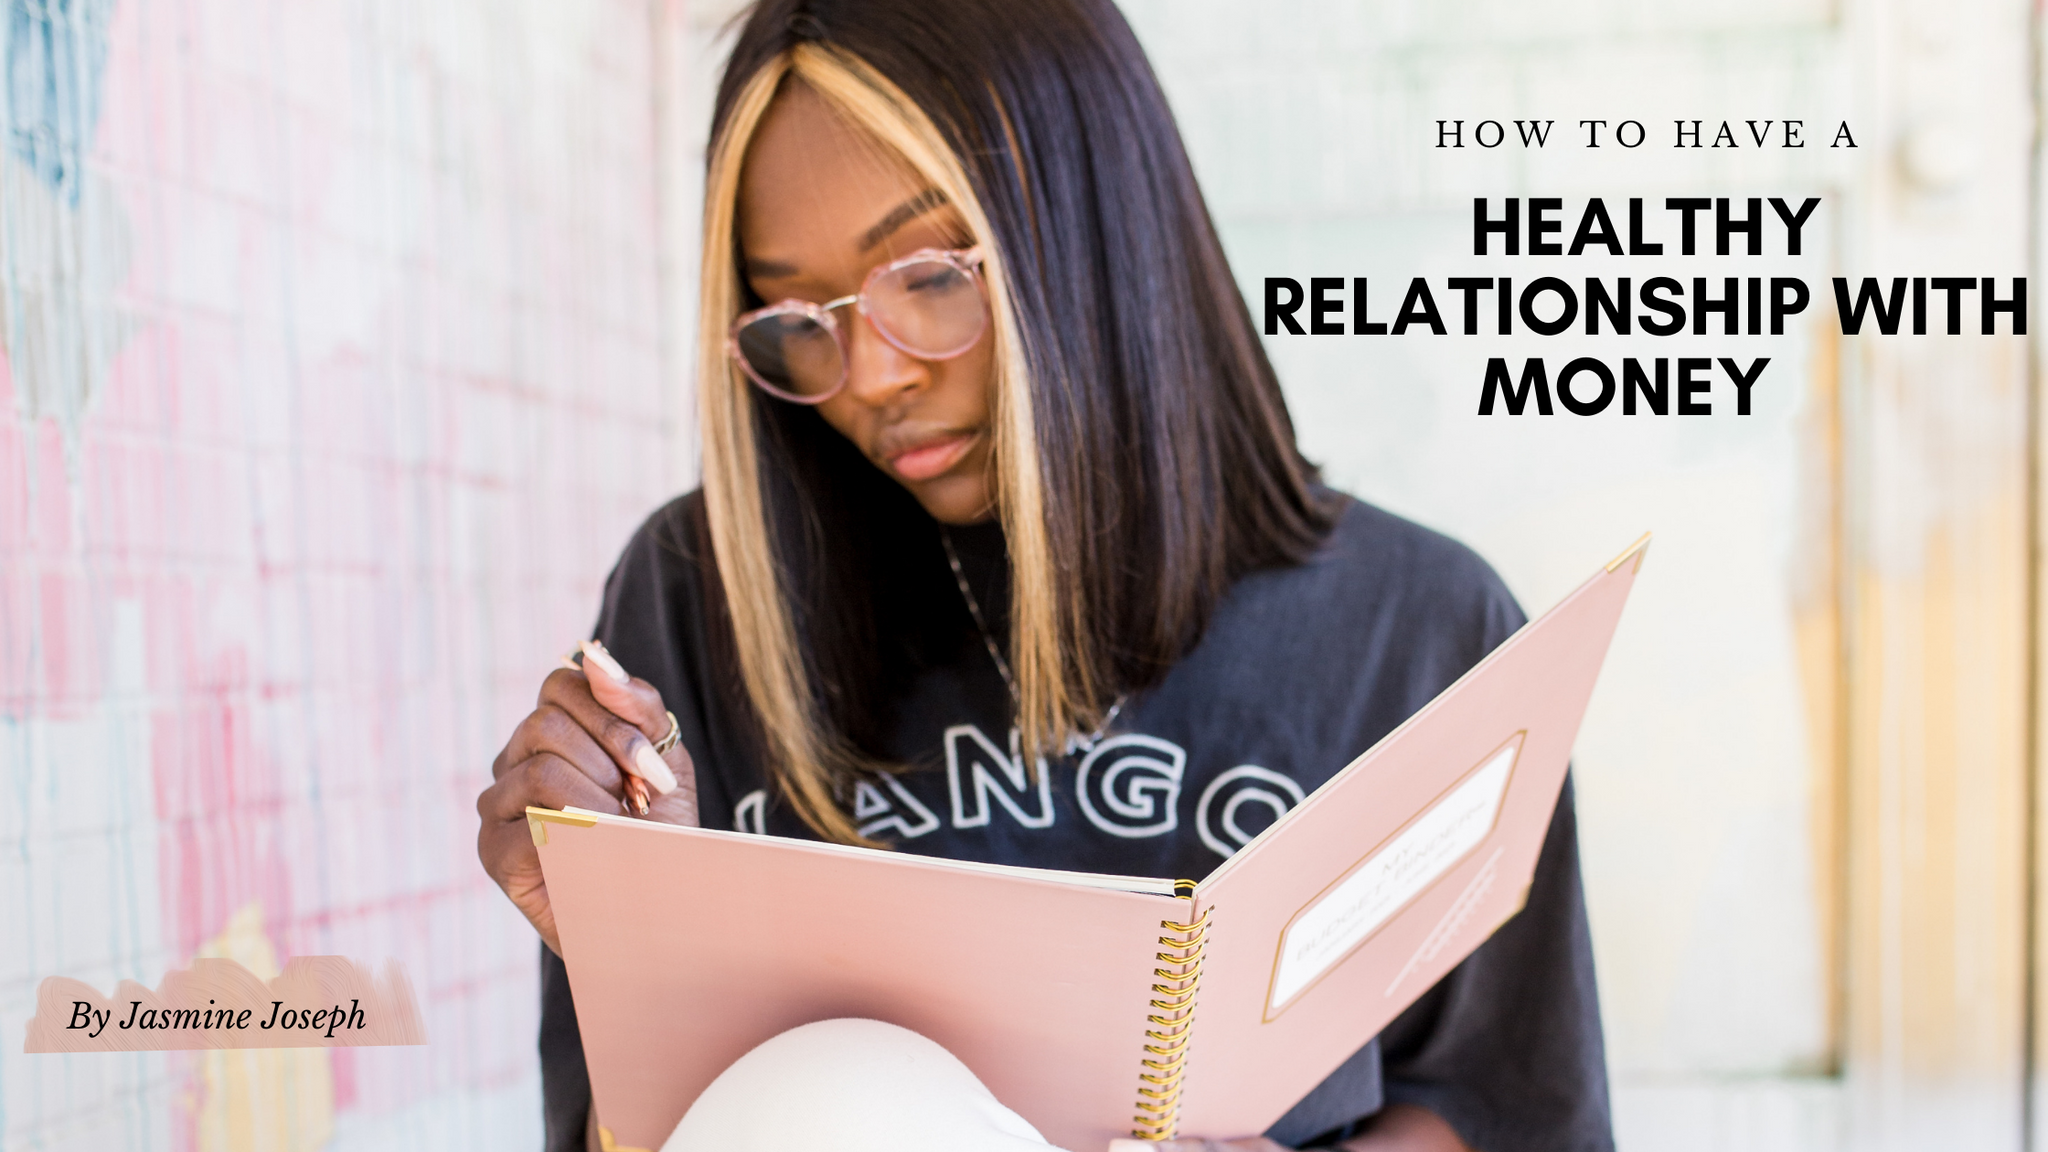 How to have a Healthy relationship with money?